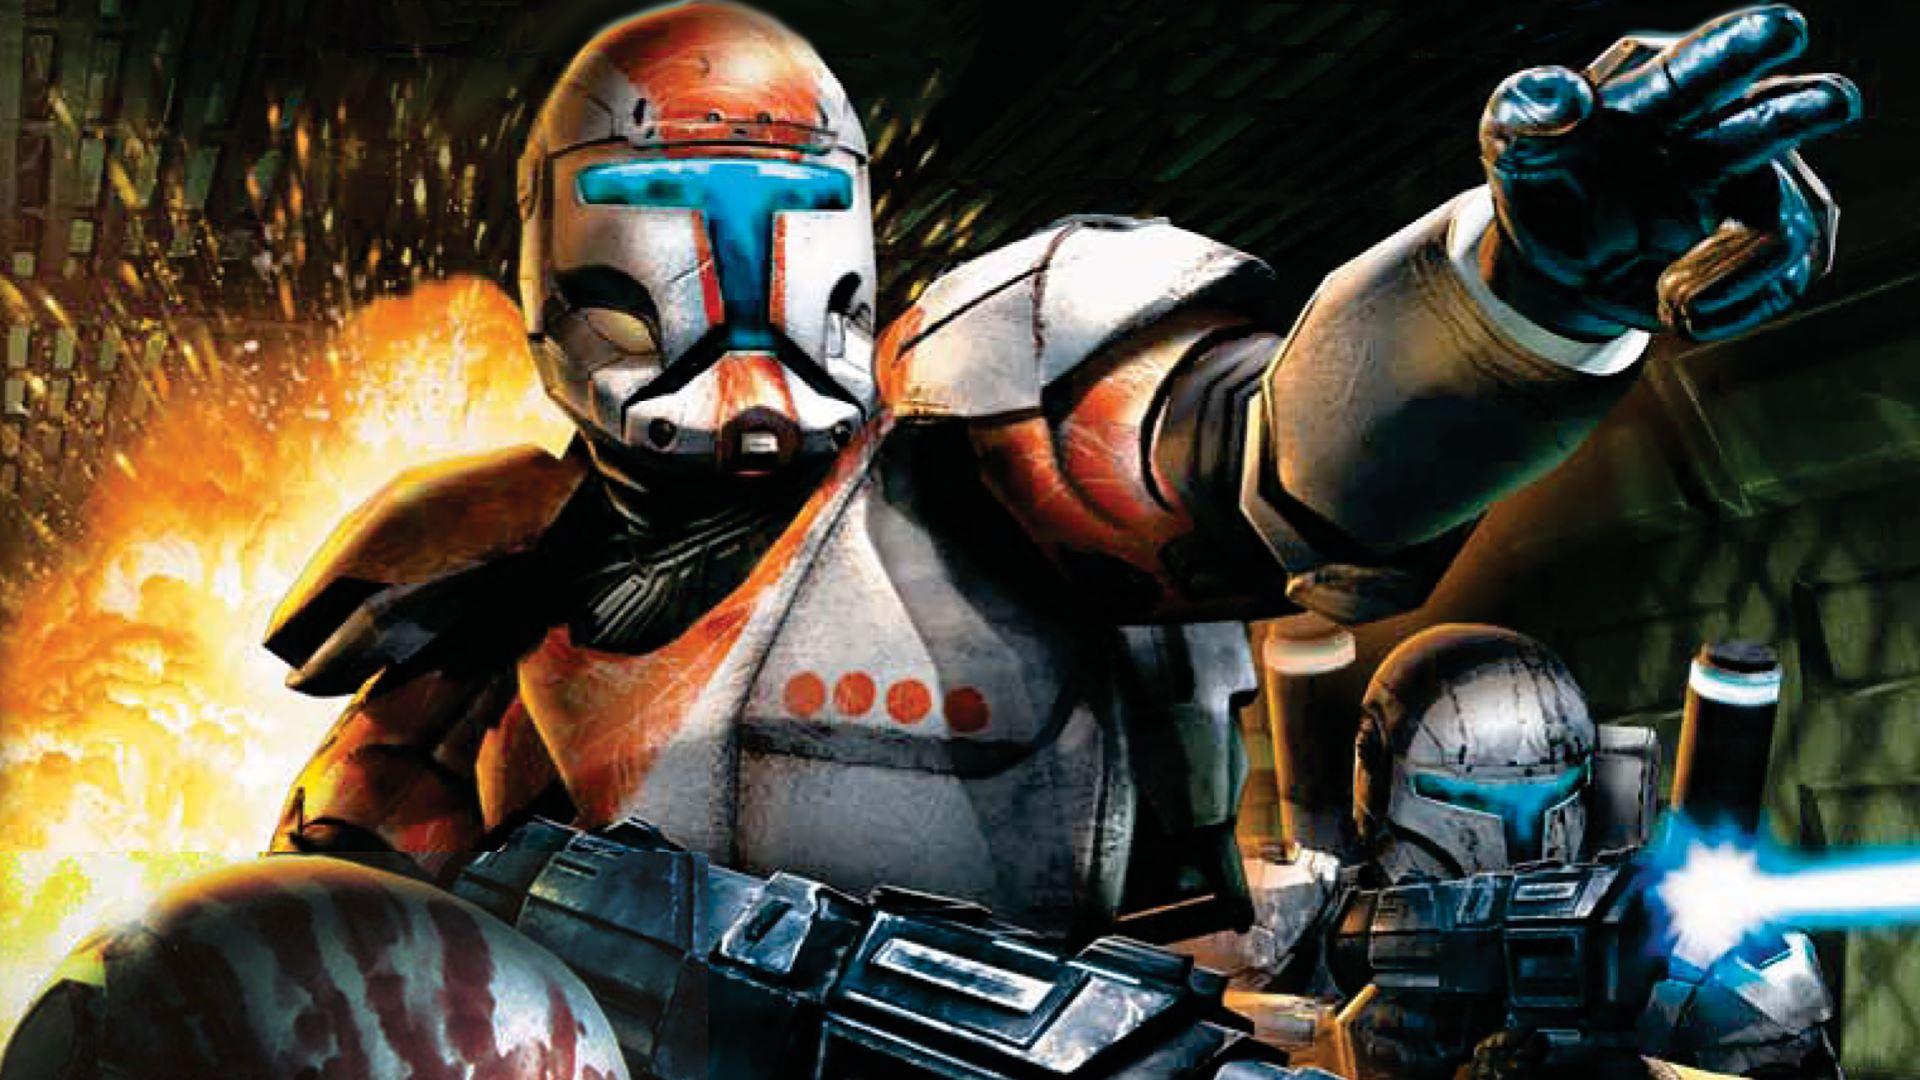 Star Wars Republic Commando's simplicity is what we need in 2019